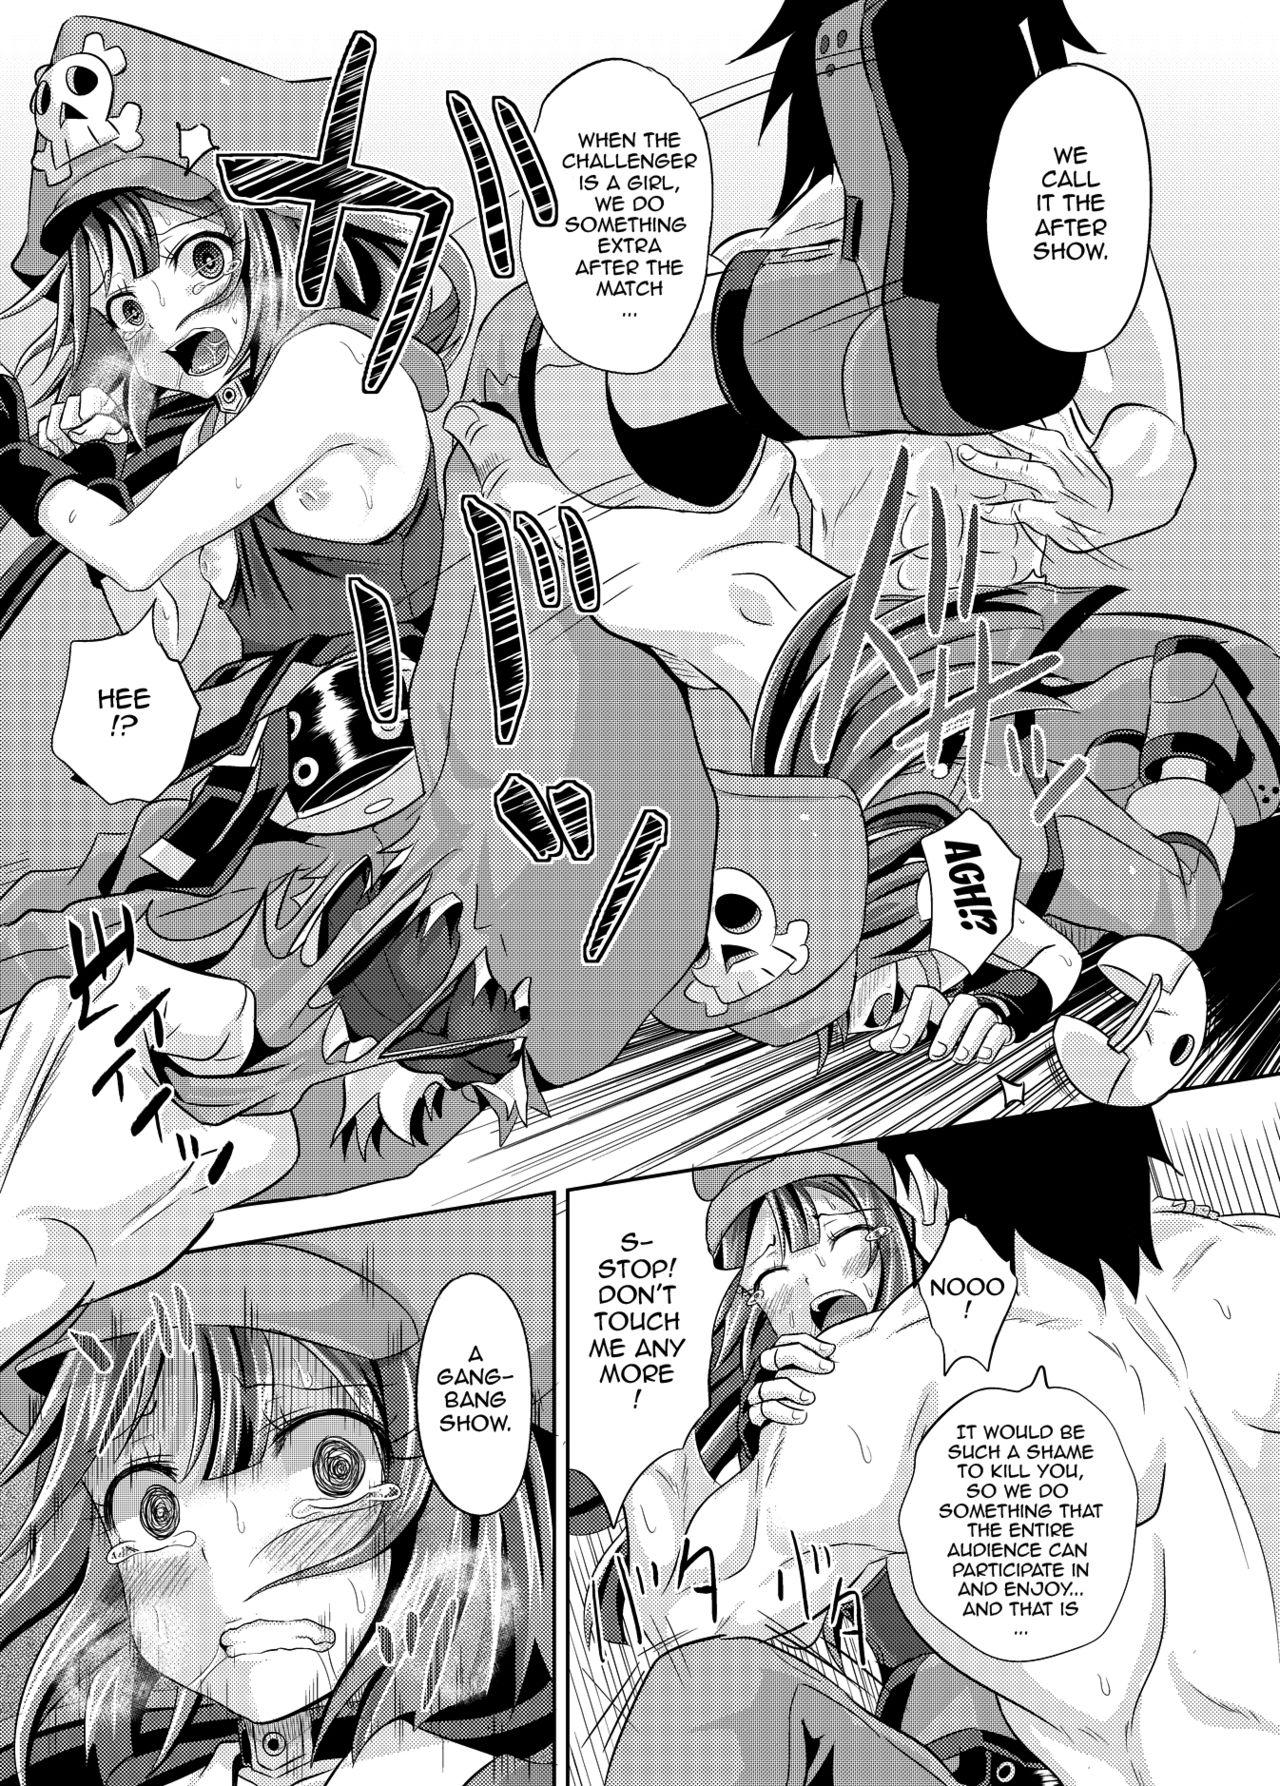 Famosa May-chan Battle Arena - Guilty gear Cumload - Page 10